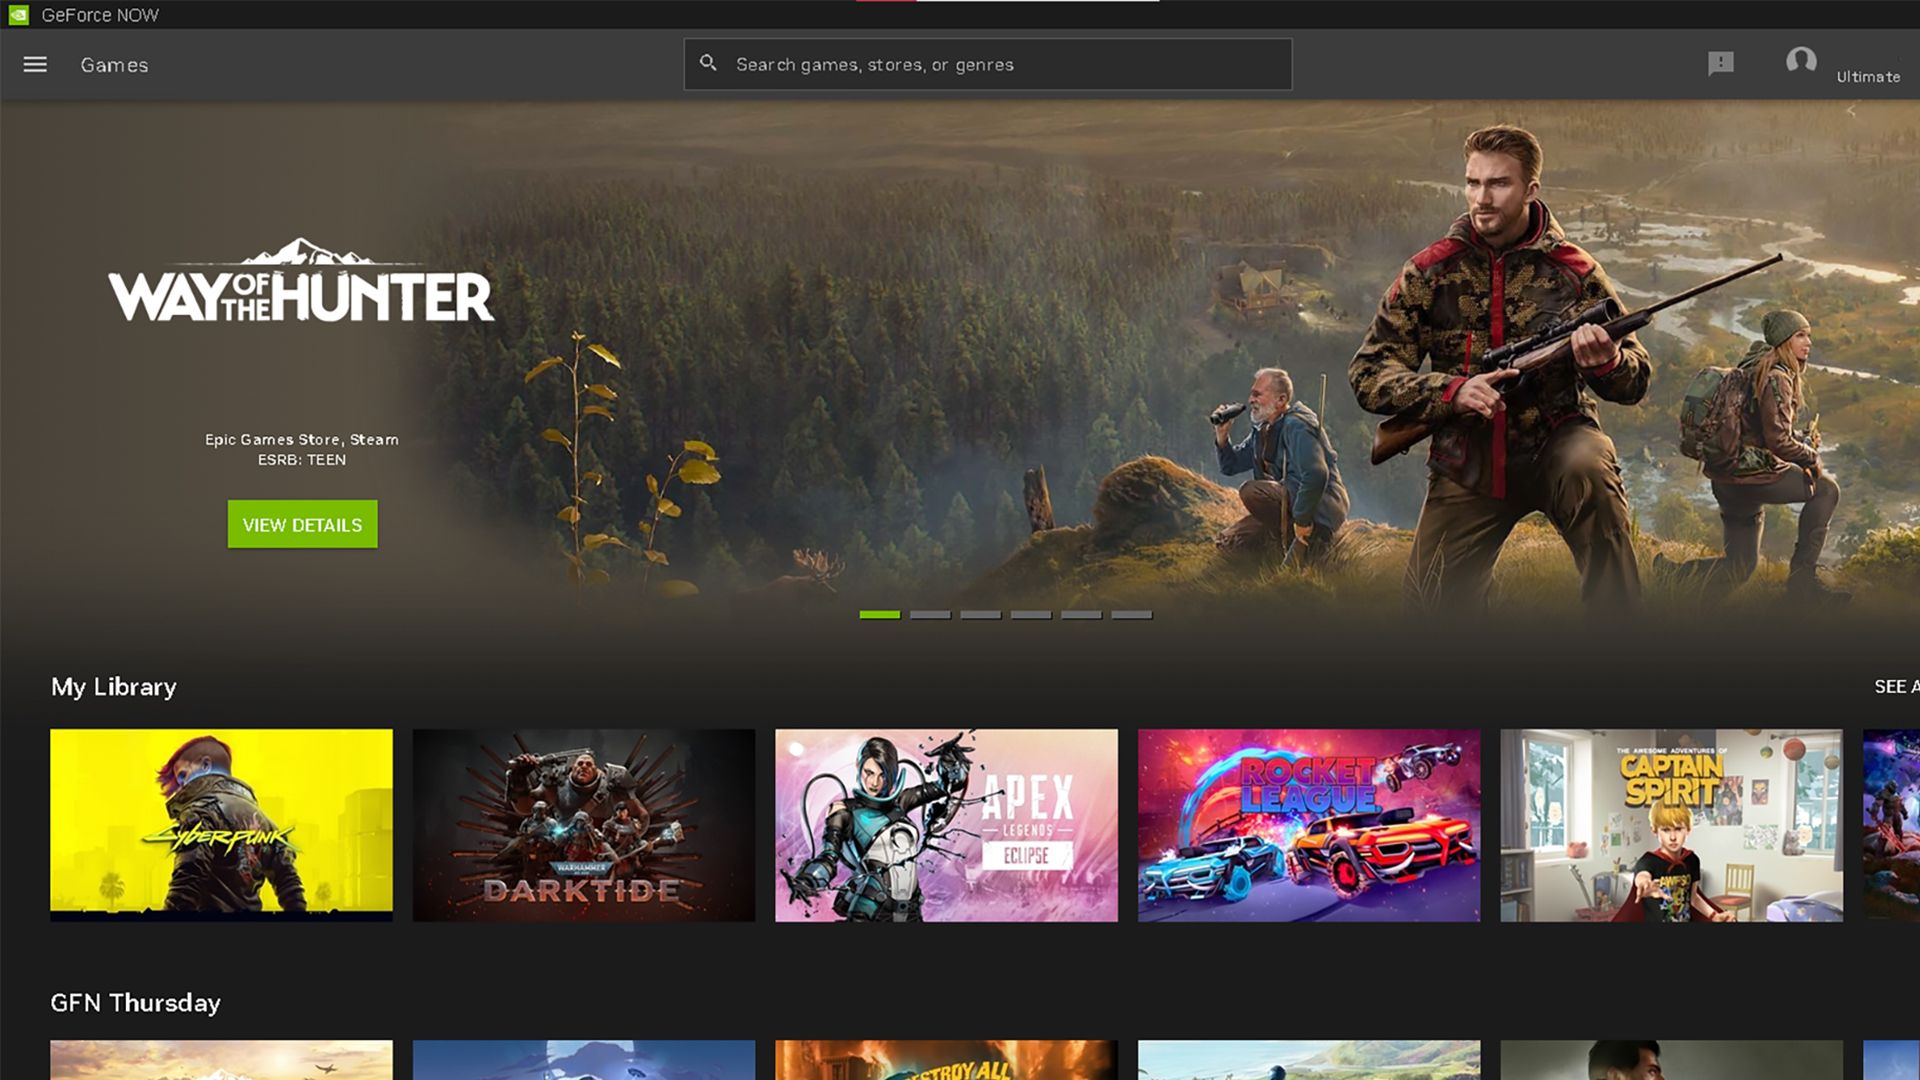 The NVIDIA GeForce NOW Windows app on the homepage.